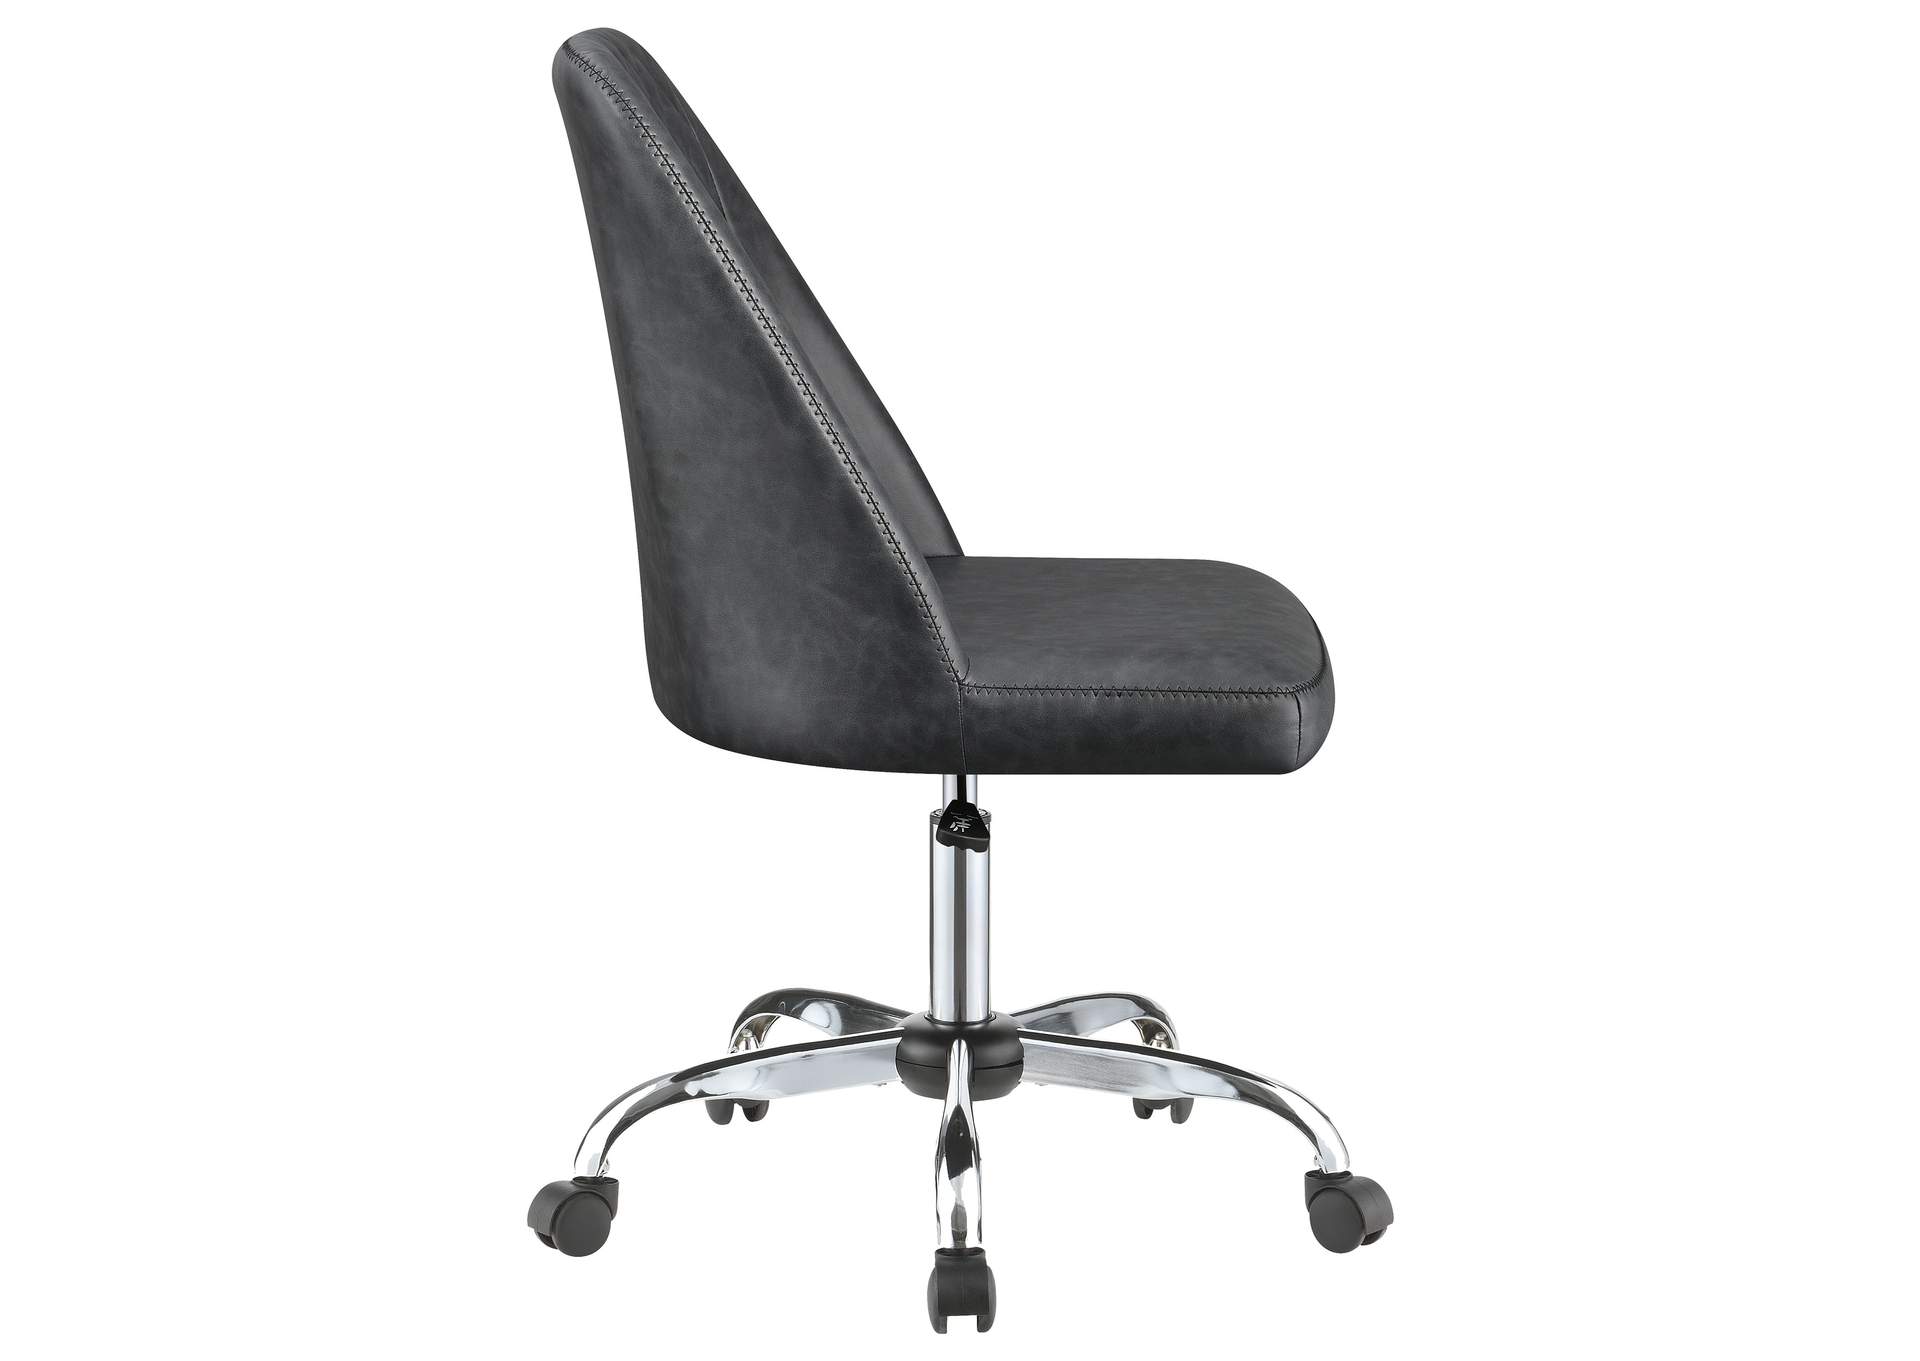 Althea Upholstered Tufted Back Office Chair Grey and Chrome,Coaster Furniture